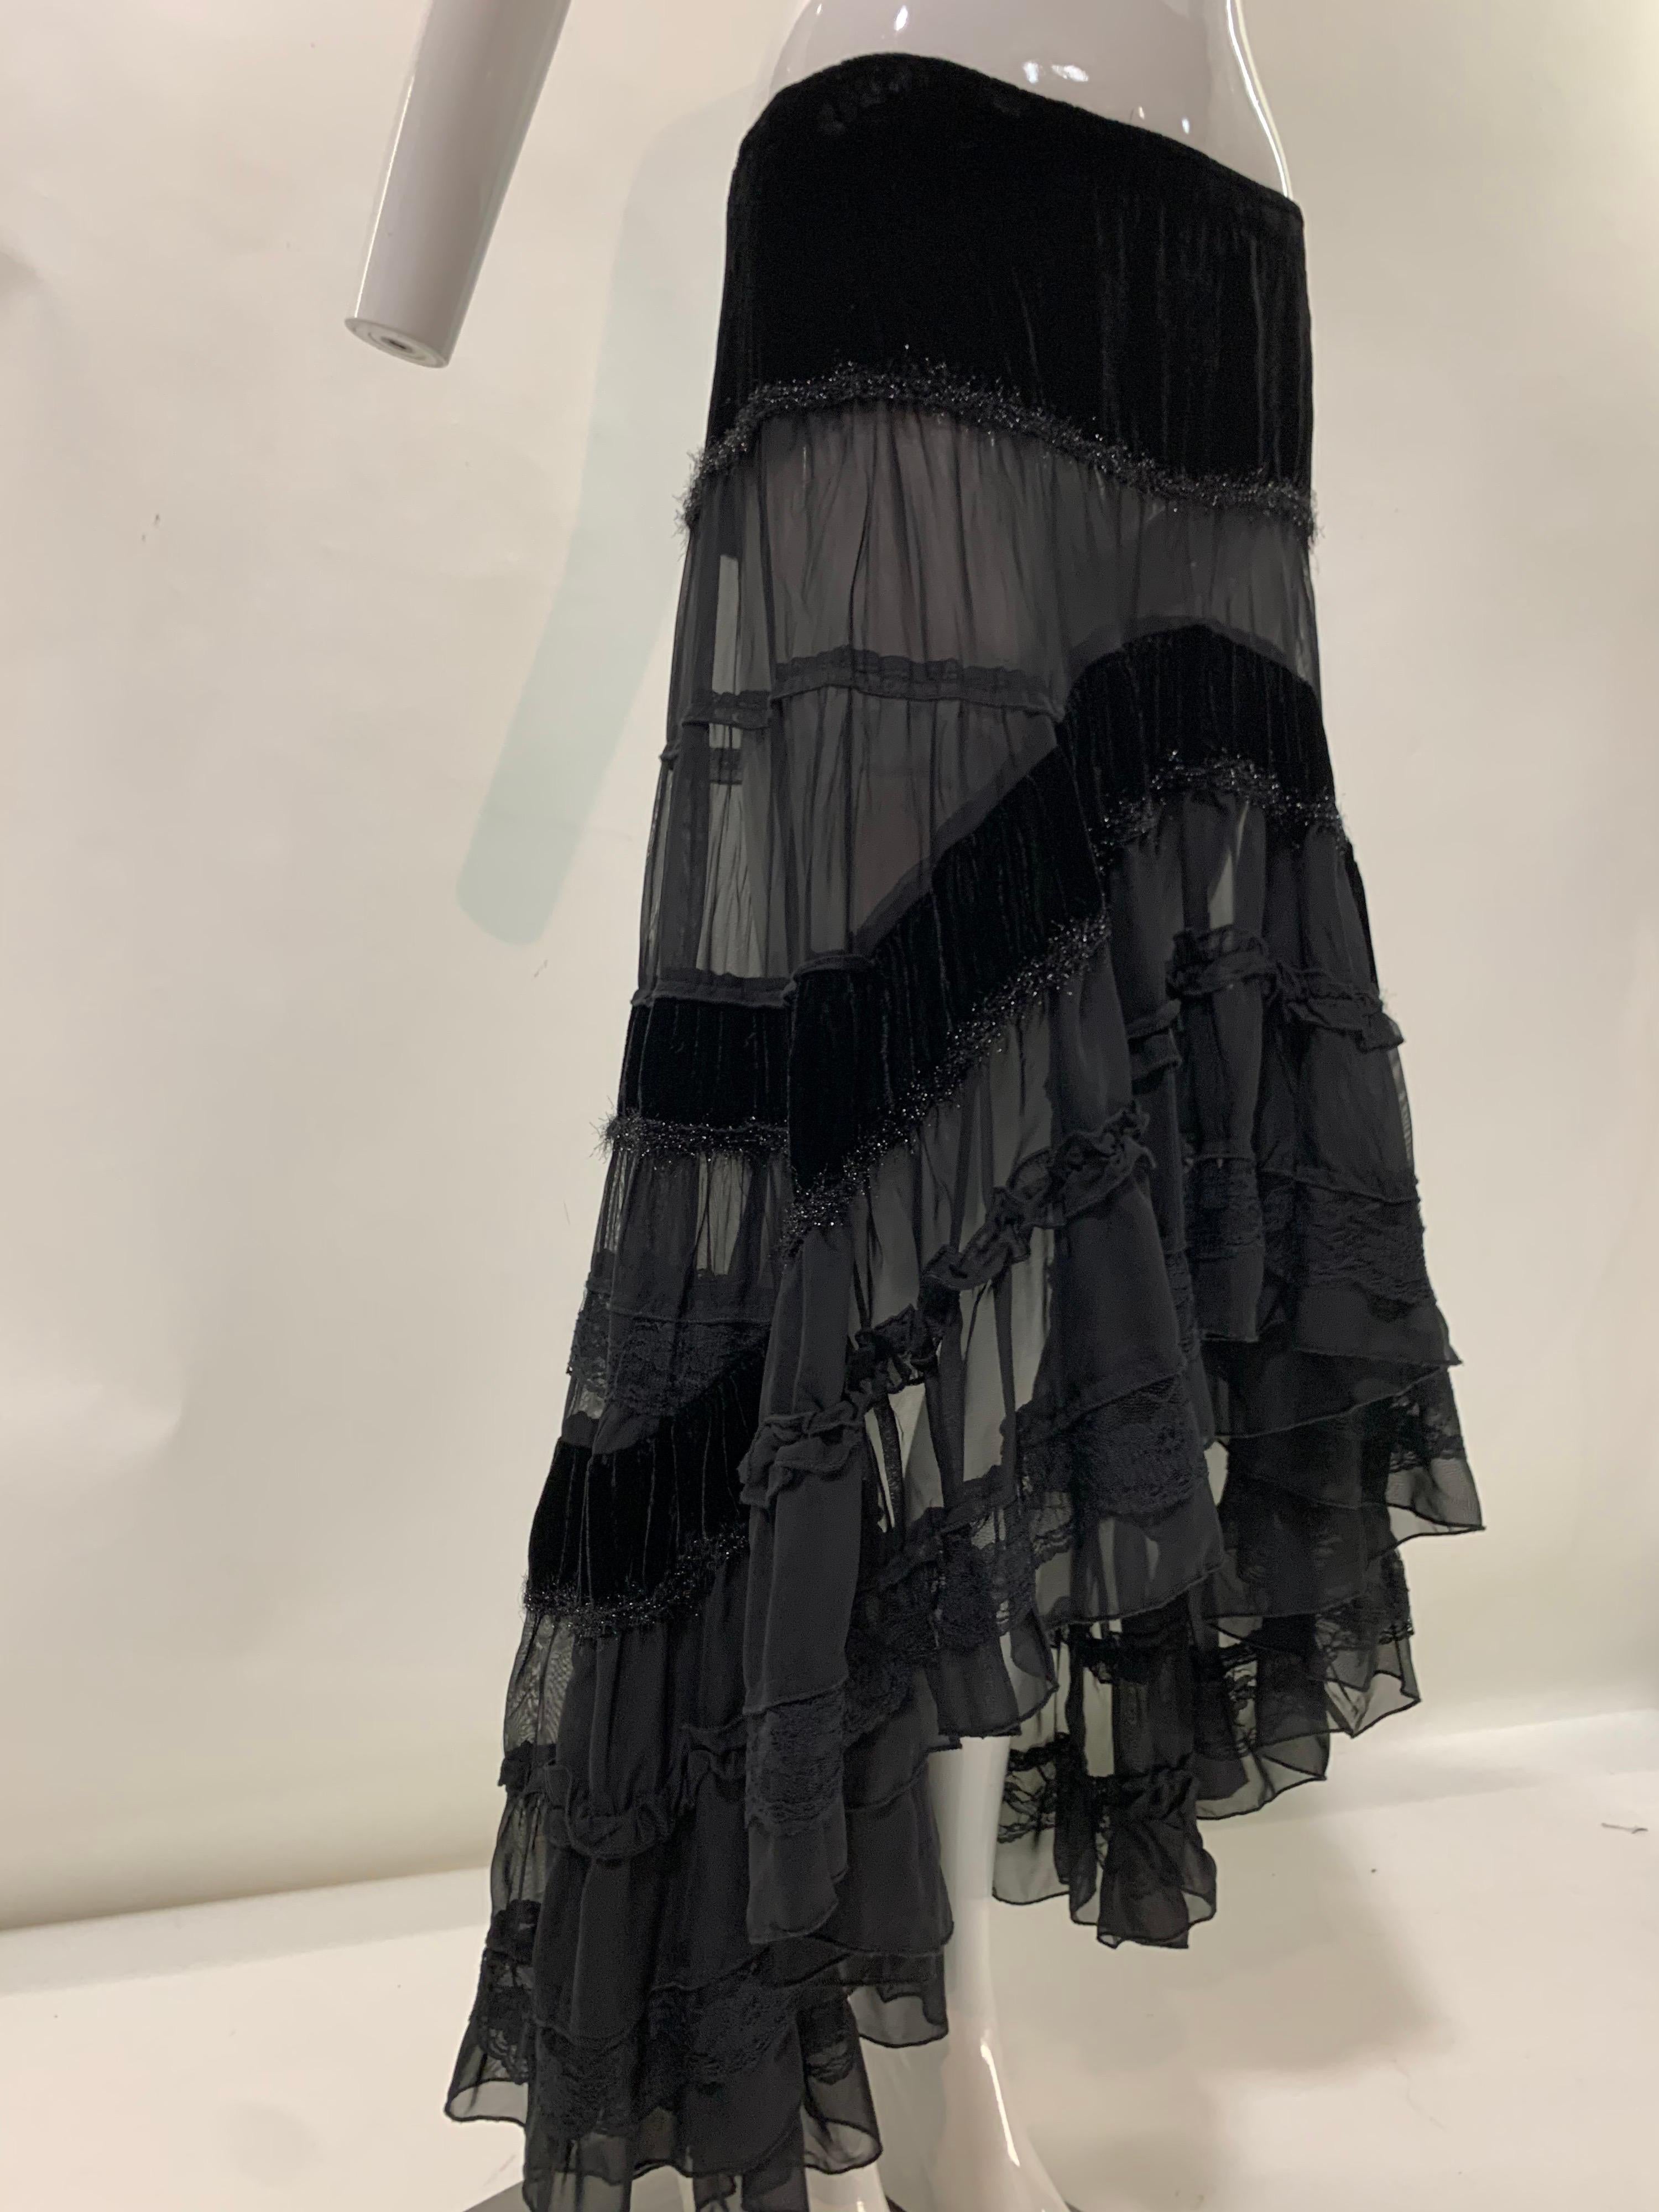 A fabulously Bohemian Torso Creations black silk chiffon, velvet and lace trimmed tiered peasant skirt with a hi/low hemline. Side zipper. Size 6.